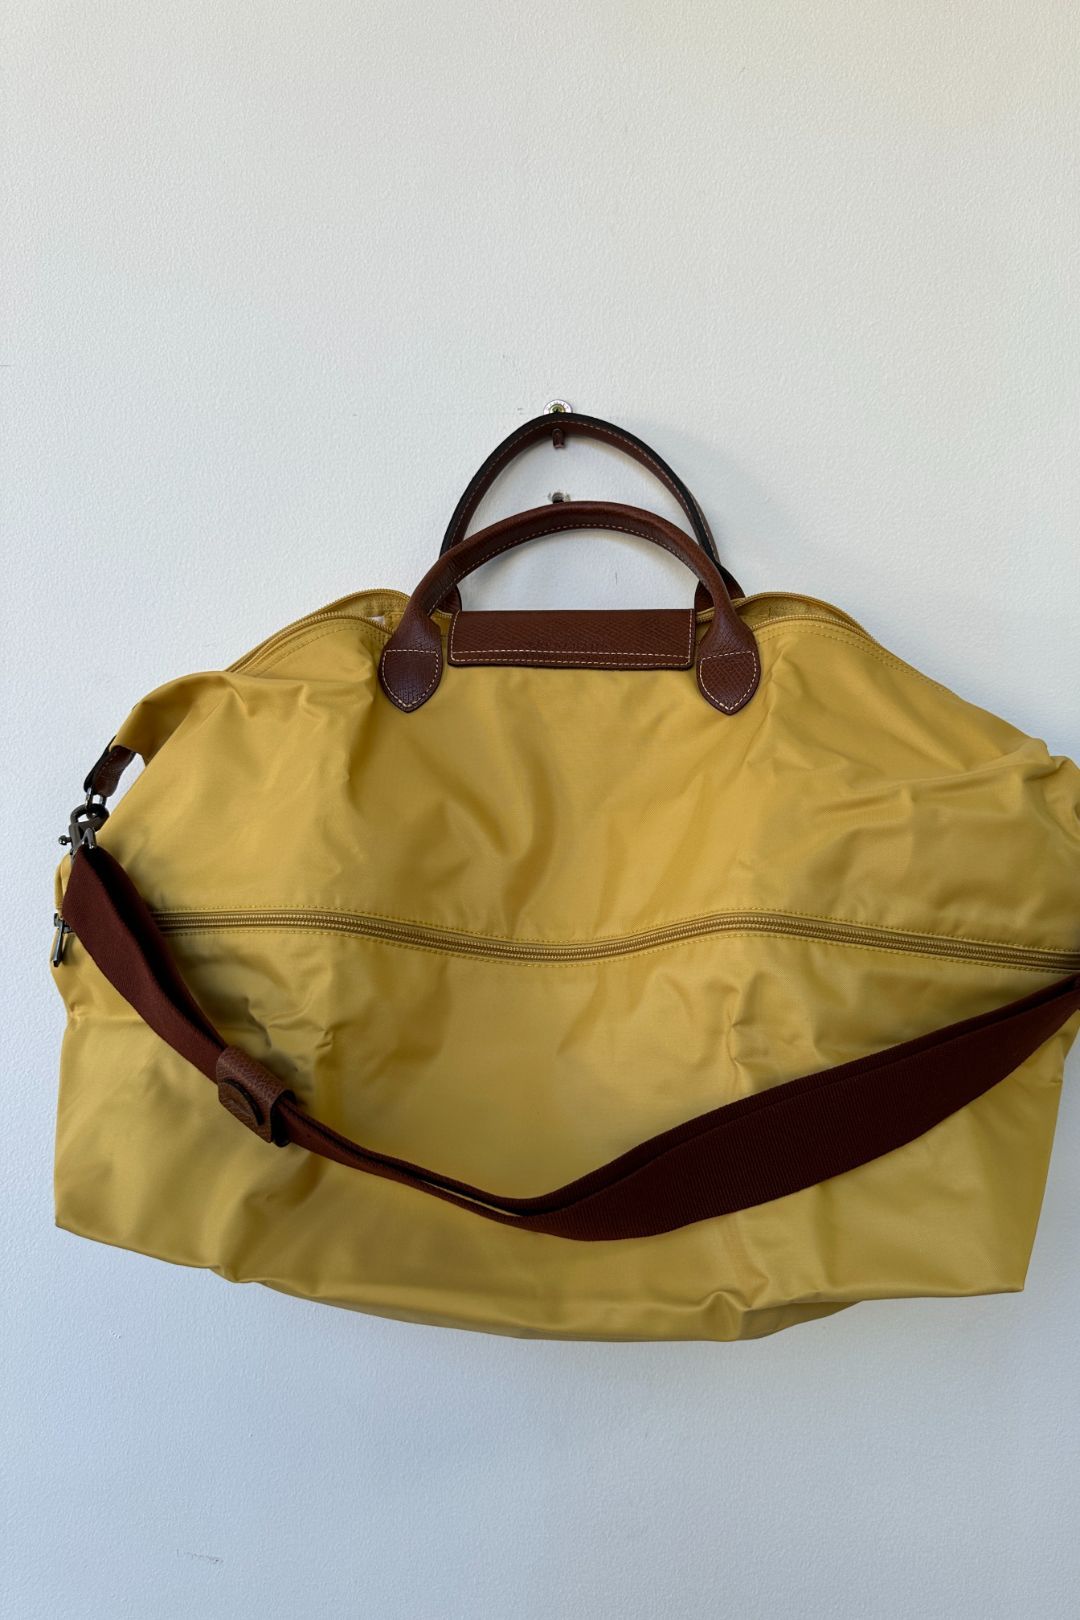 Le Pliage Expandable Travel Bag in Mustard